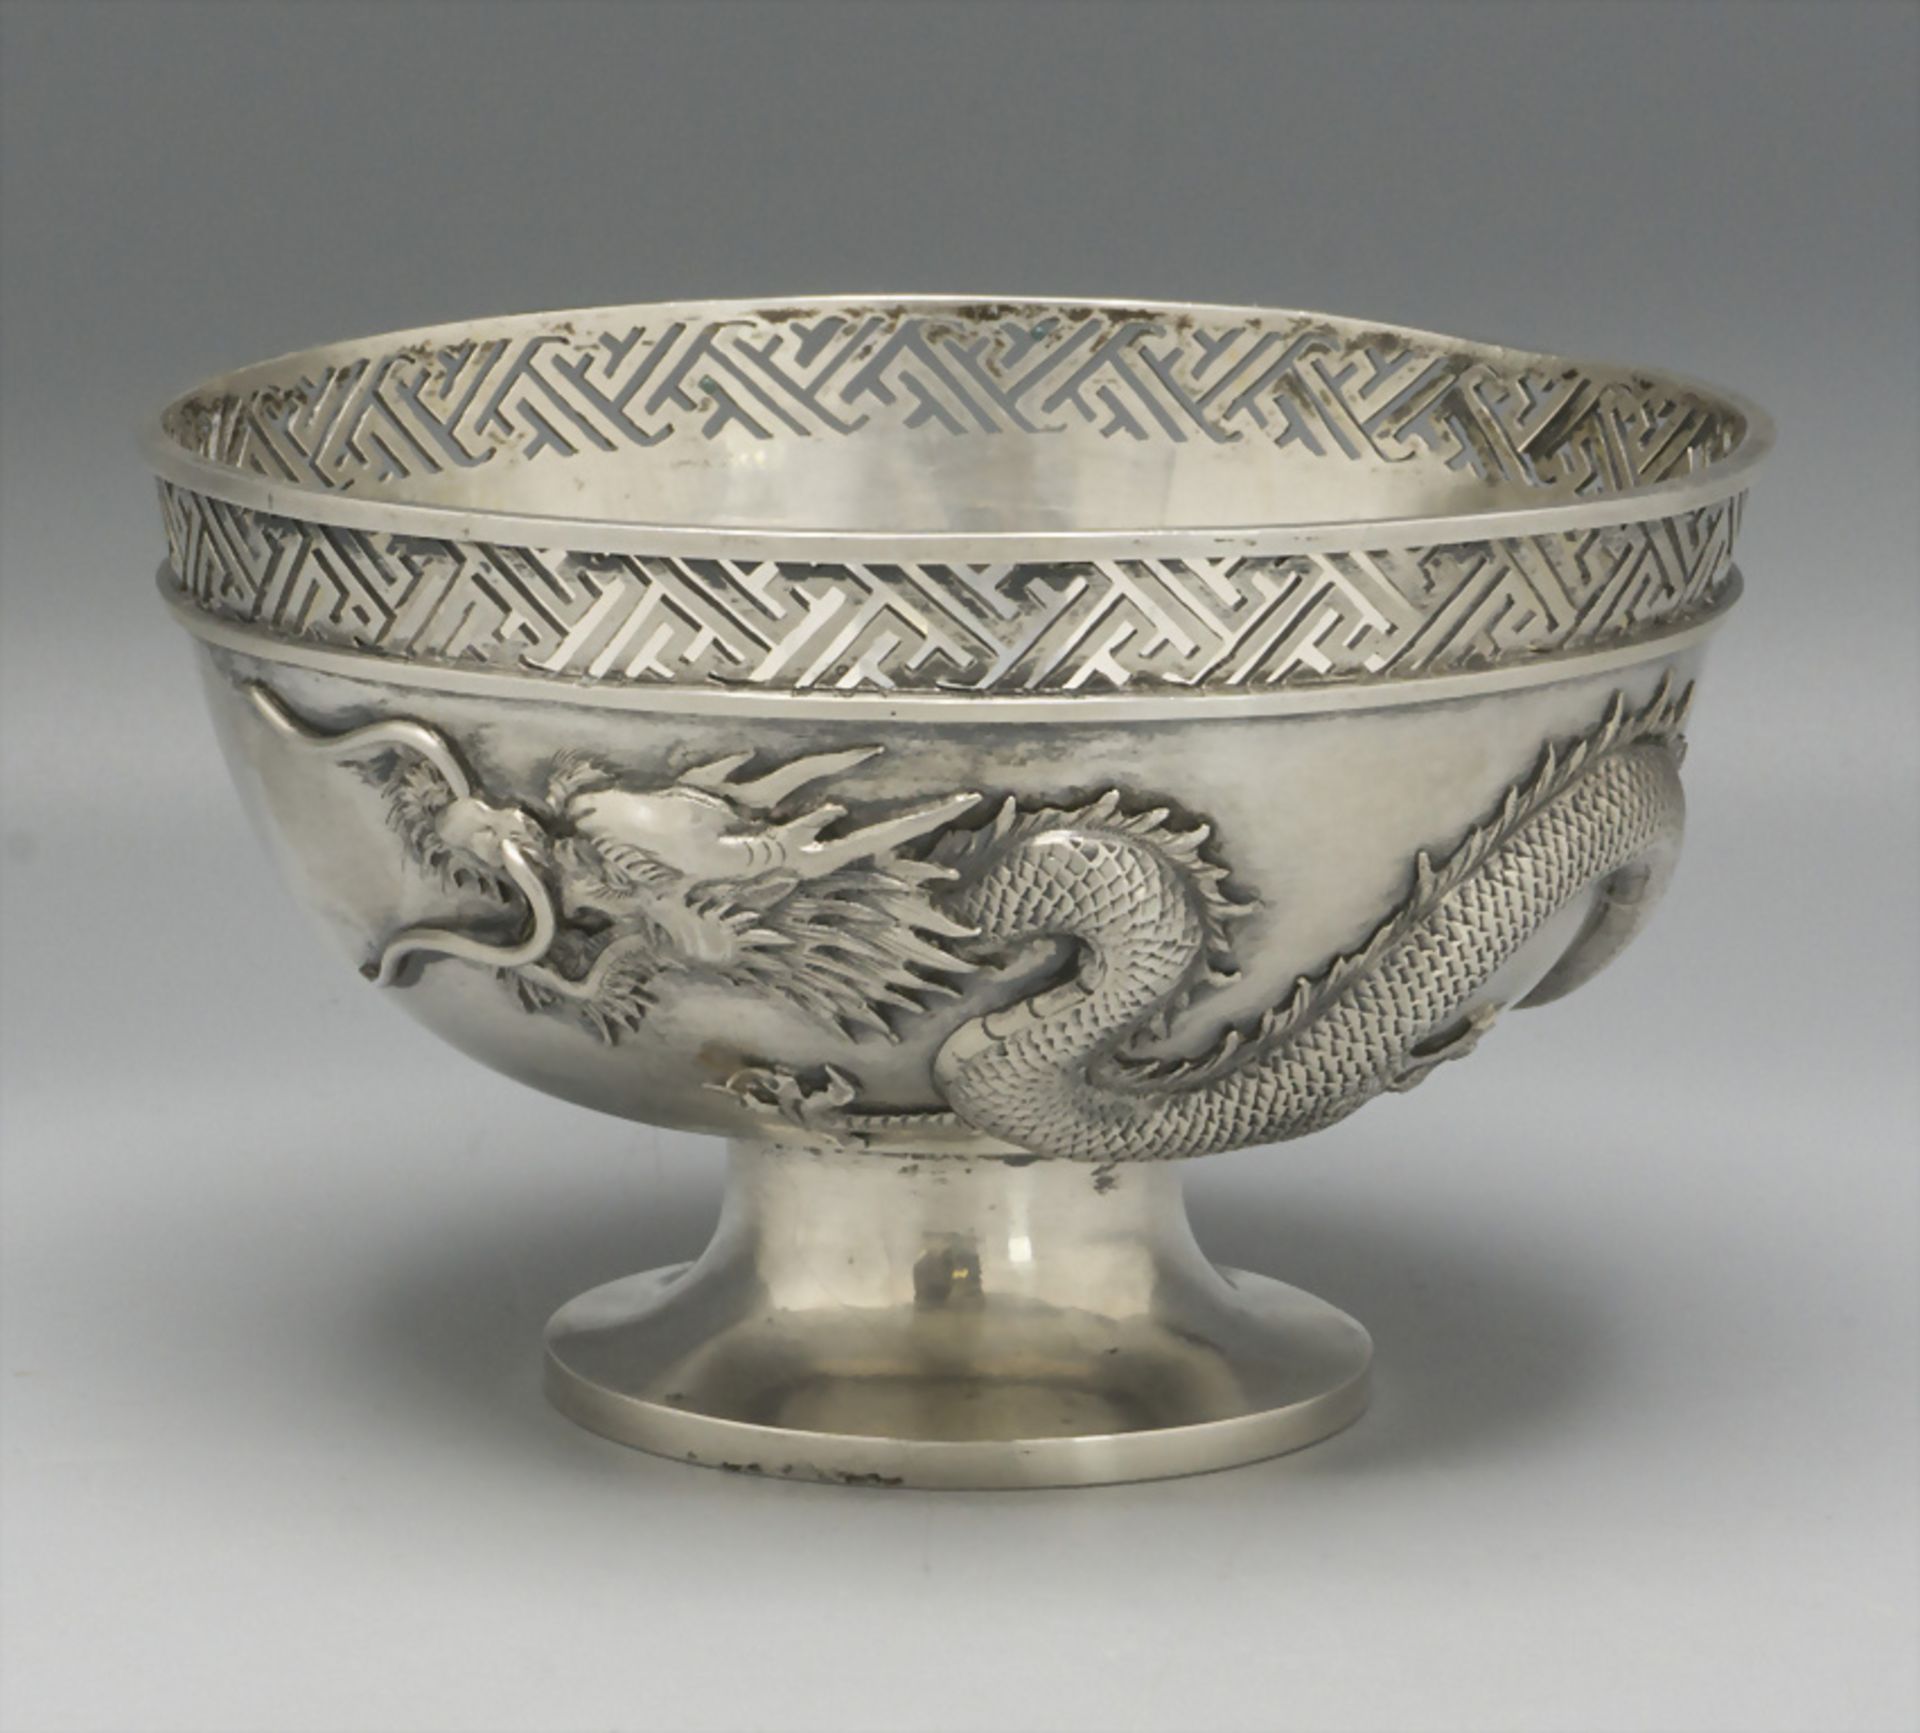 Fußschale mit Drachen / A Chinese export silver footed bowl with a dragon, Zeewo, Shanghai, um 1900